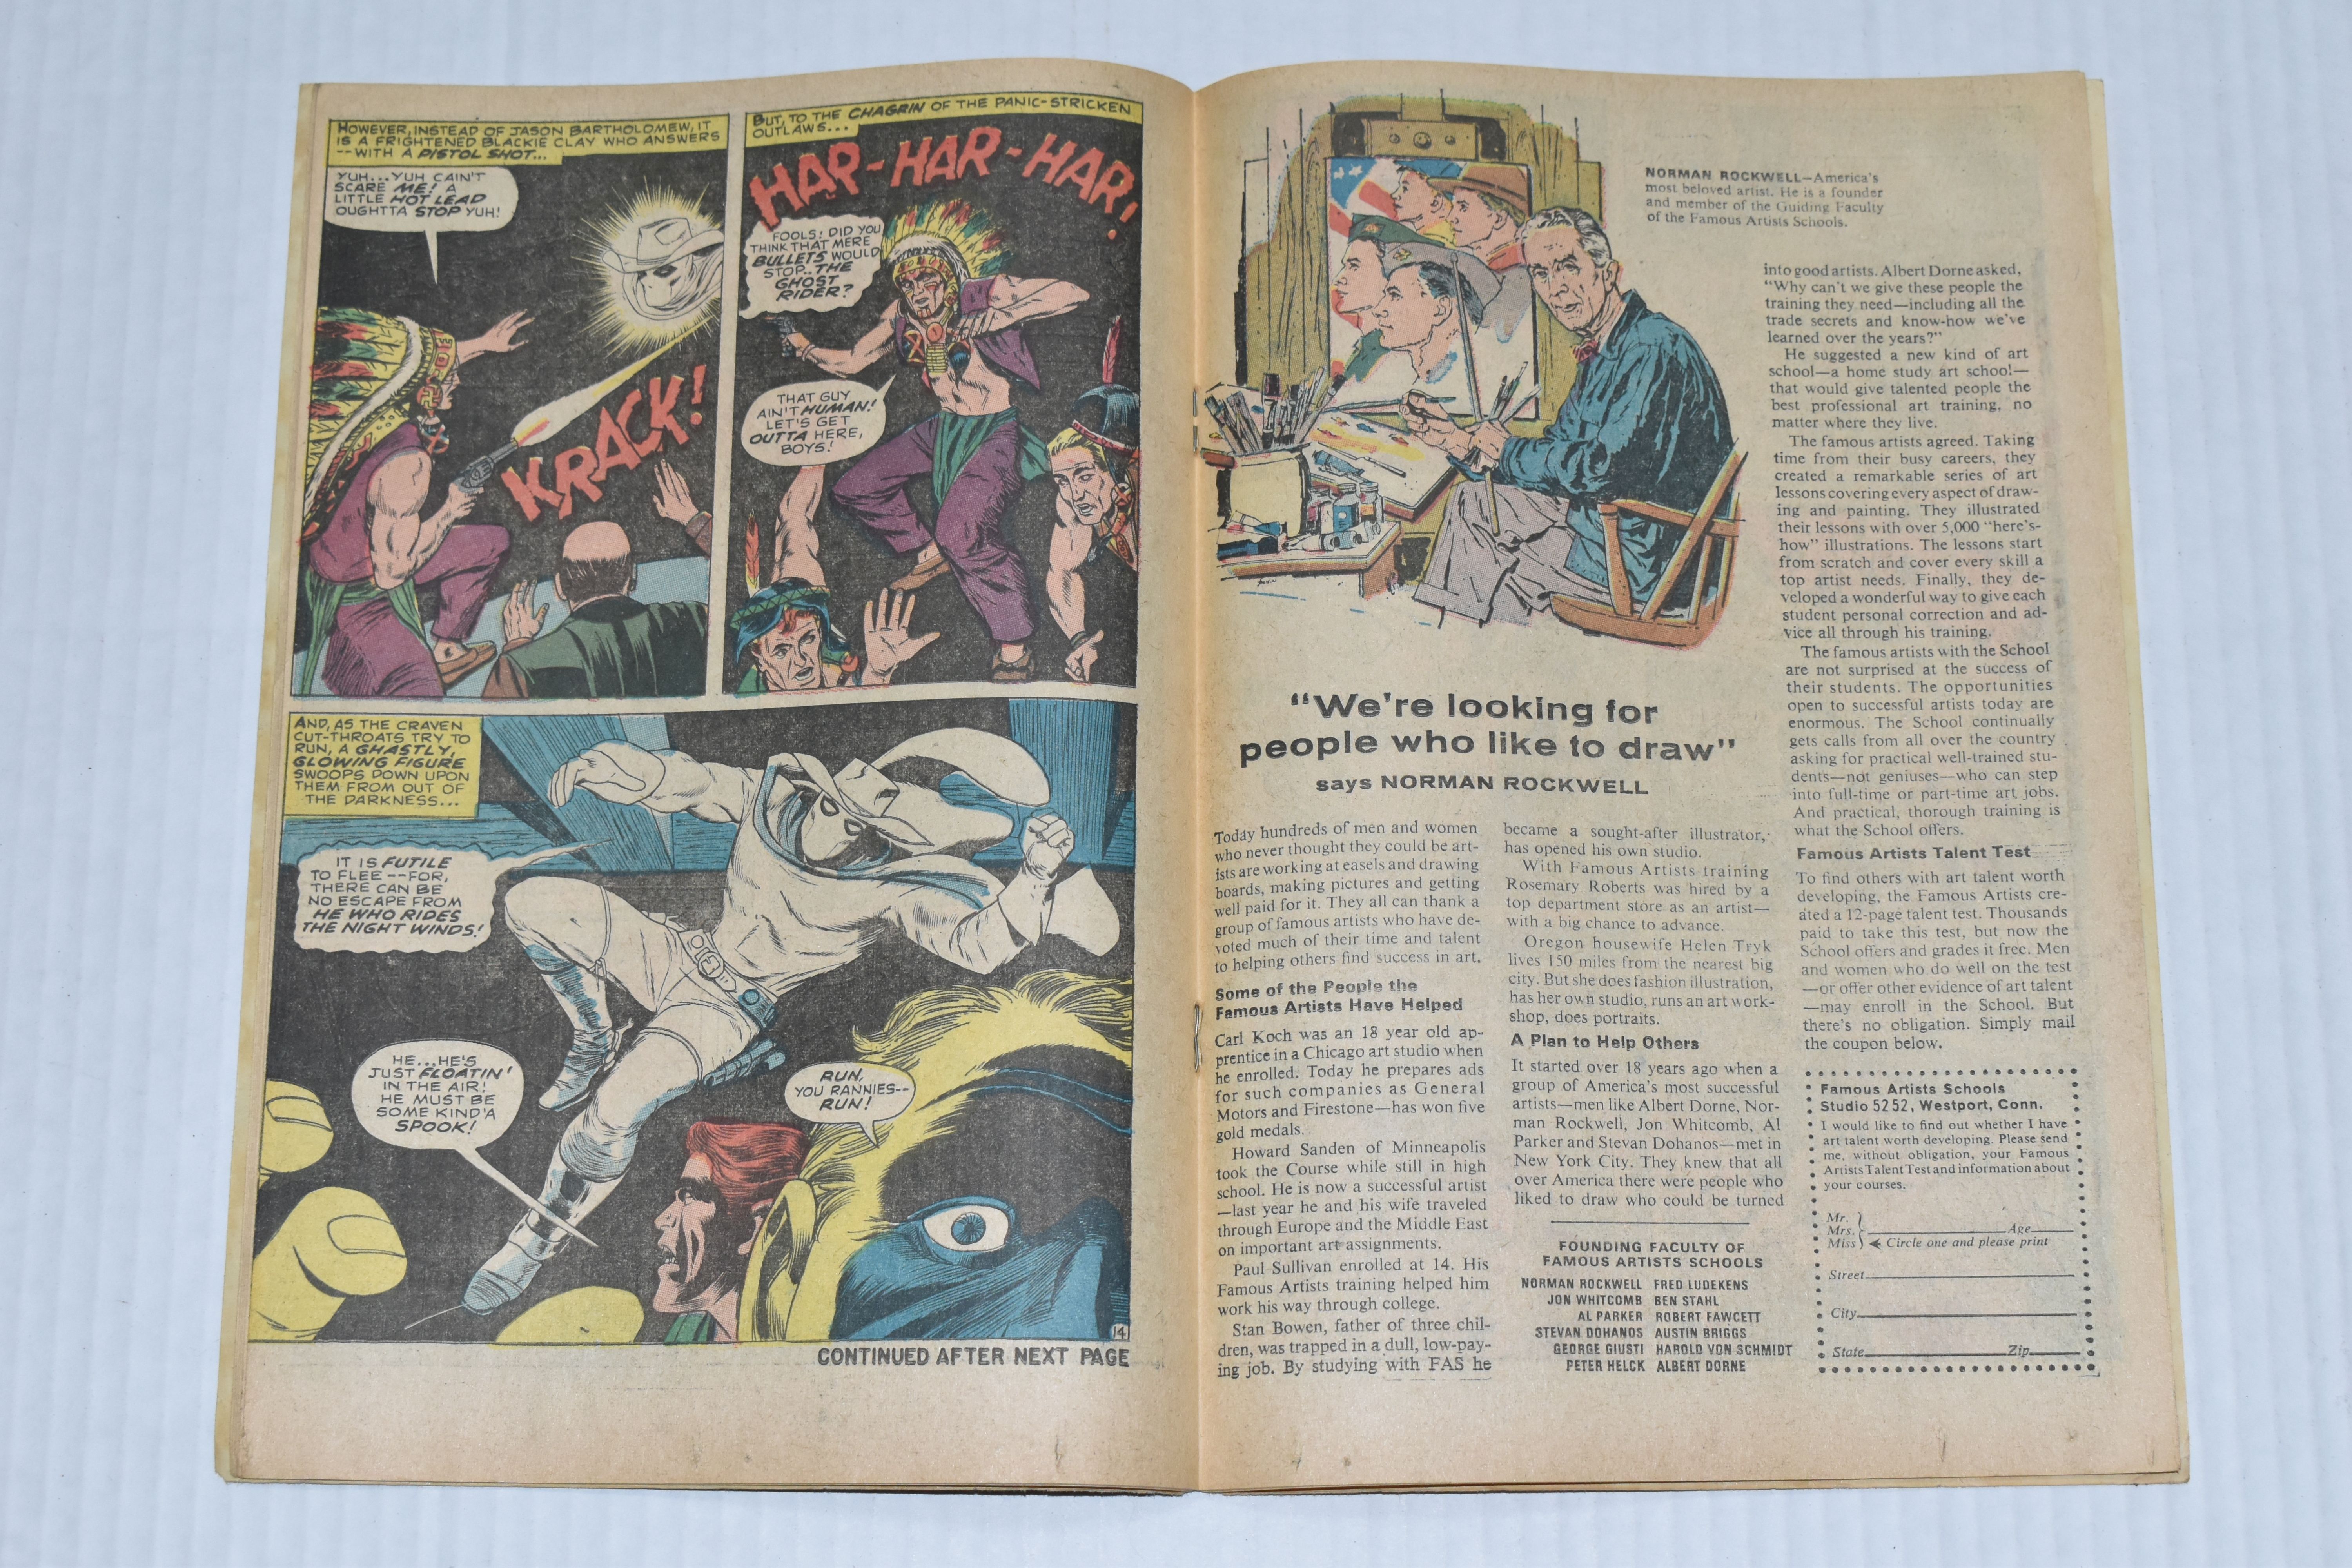 COMPLETE ORIGINAL GHOST RIDER VOLUME 1 MARVEL COMICS, features the first appearance of the - Image 25 of 25